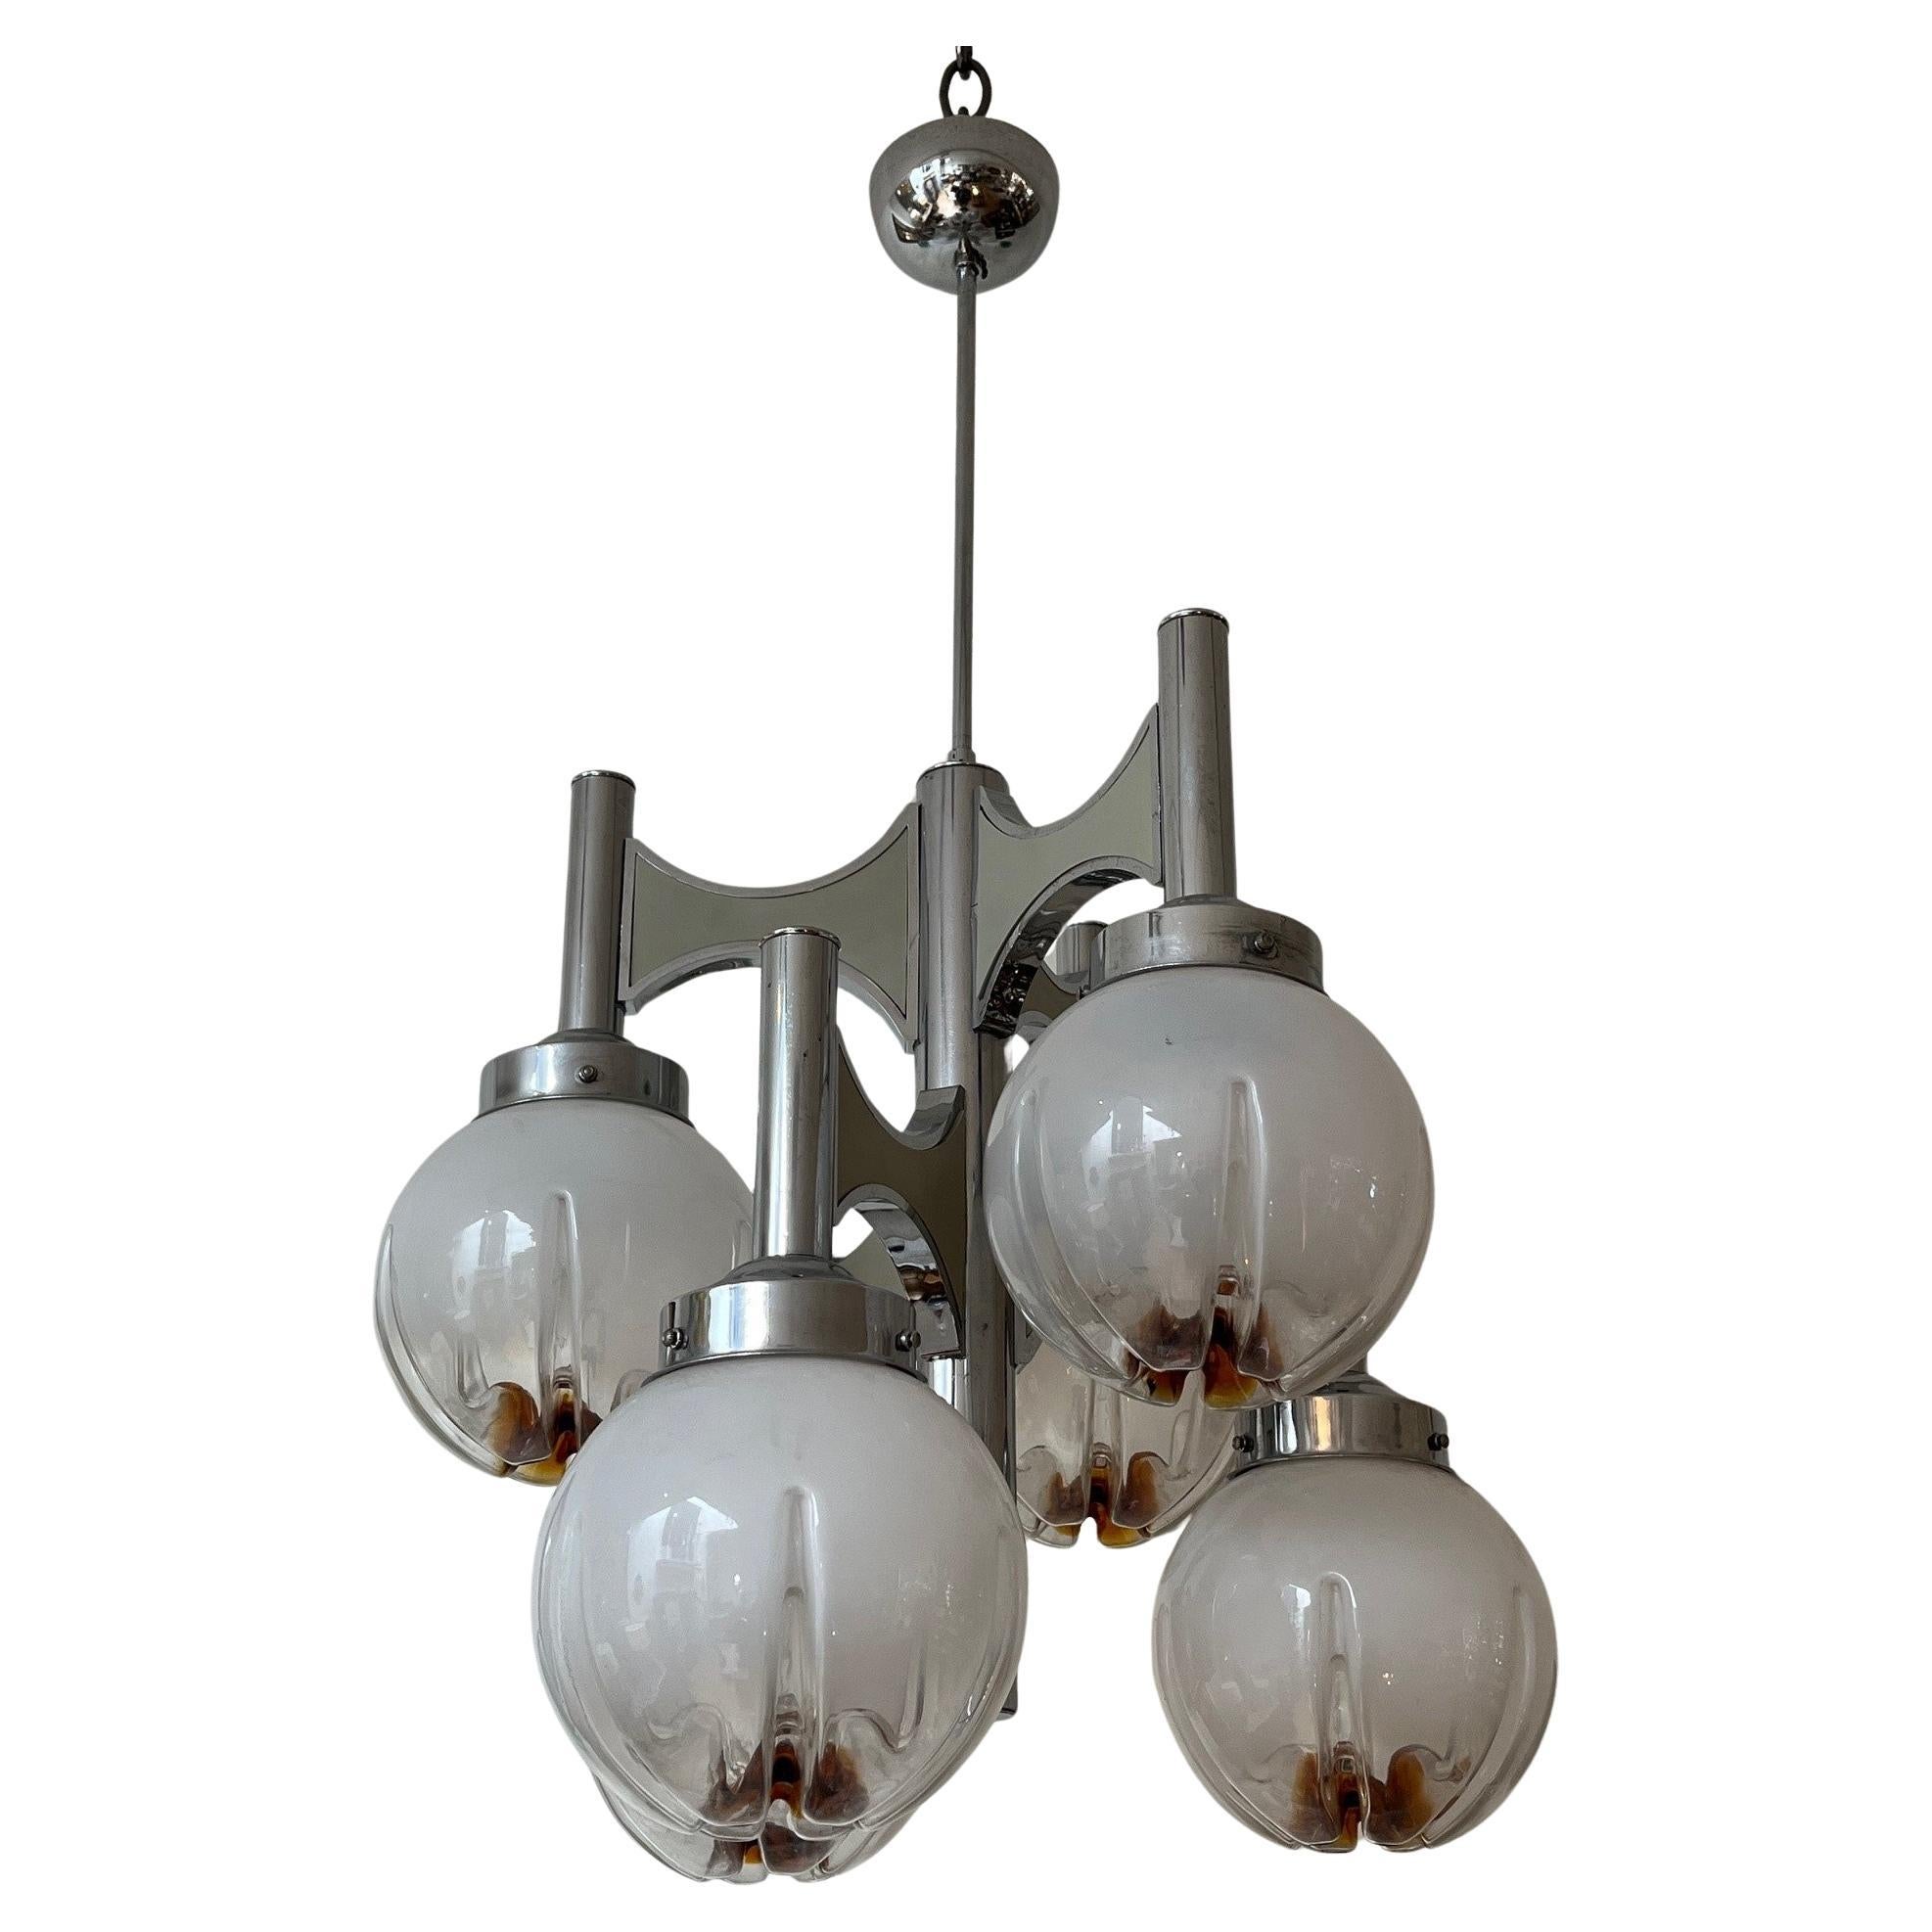 Vintage French Chrome and Glass Globes Chandelier For Sale